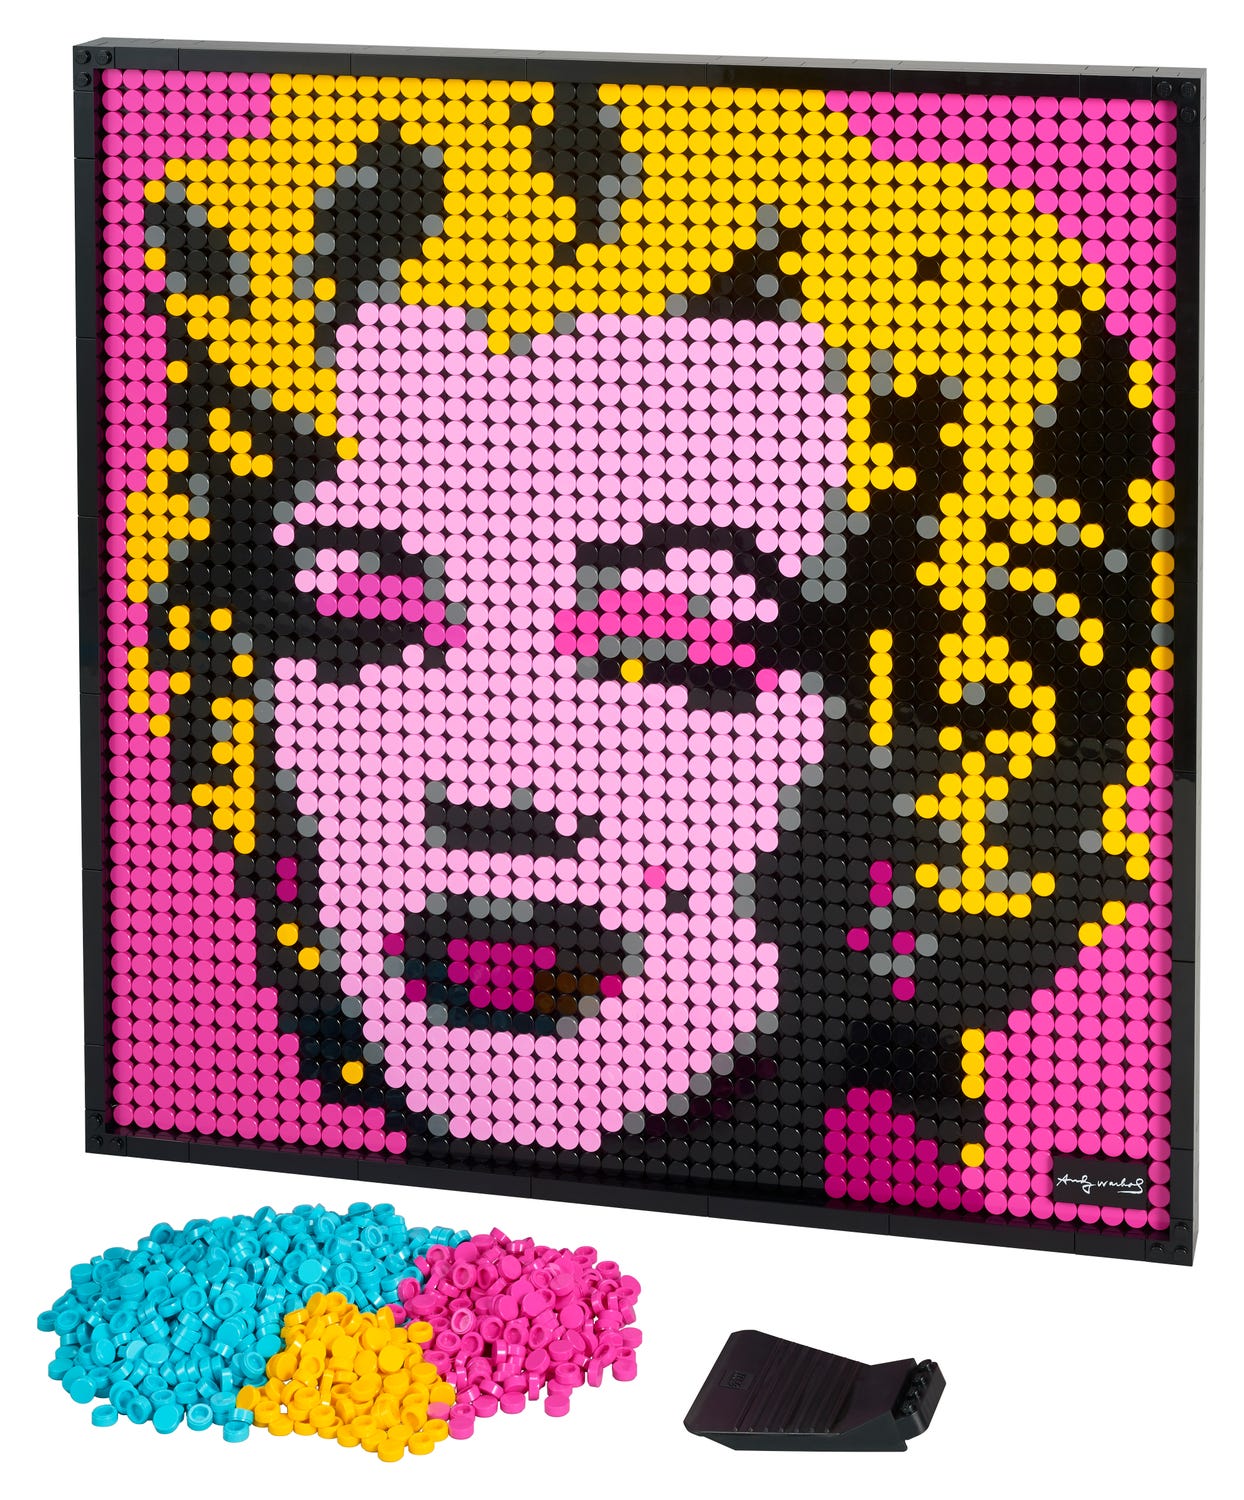 Andy Warhol S Marilyn Monroe 31197 Lego Art Buy Online At The Official Lego Shop Us